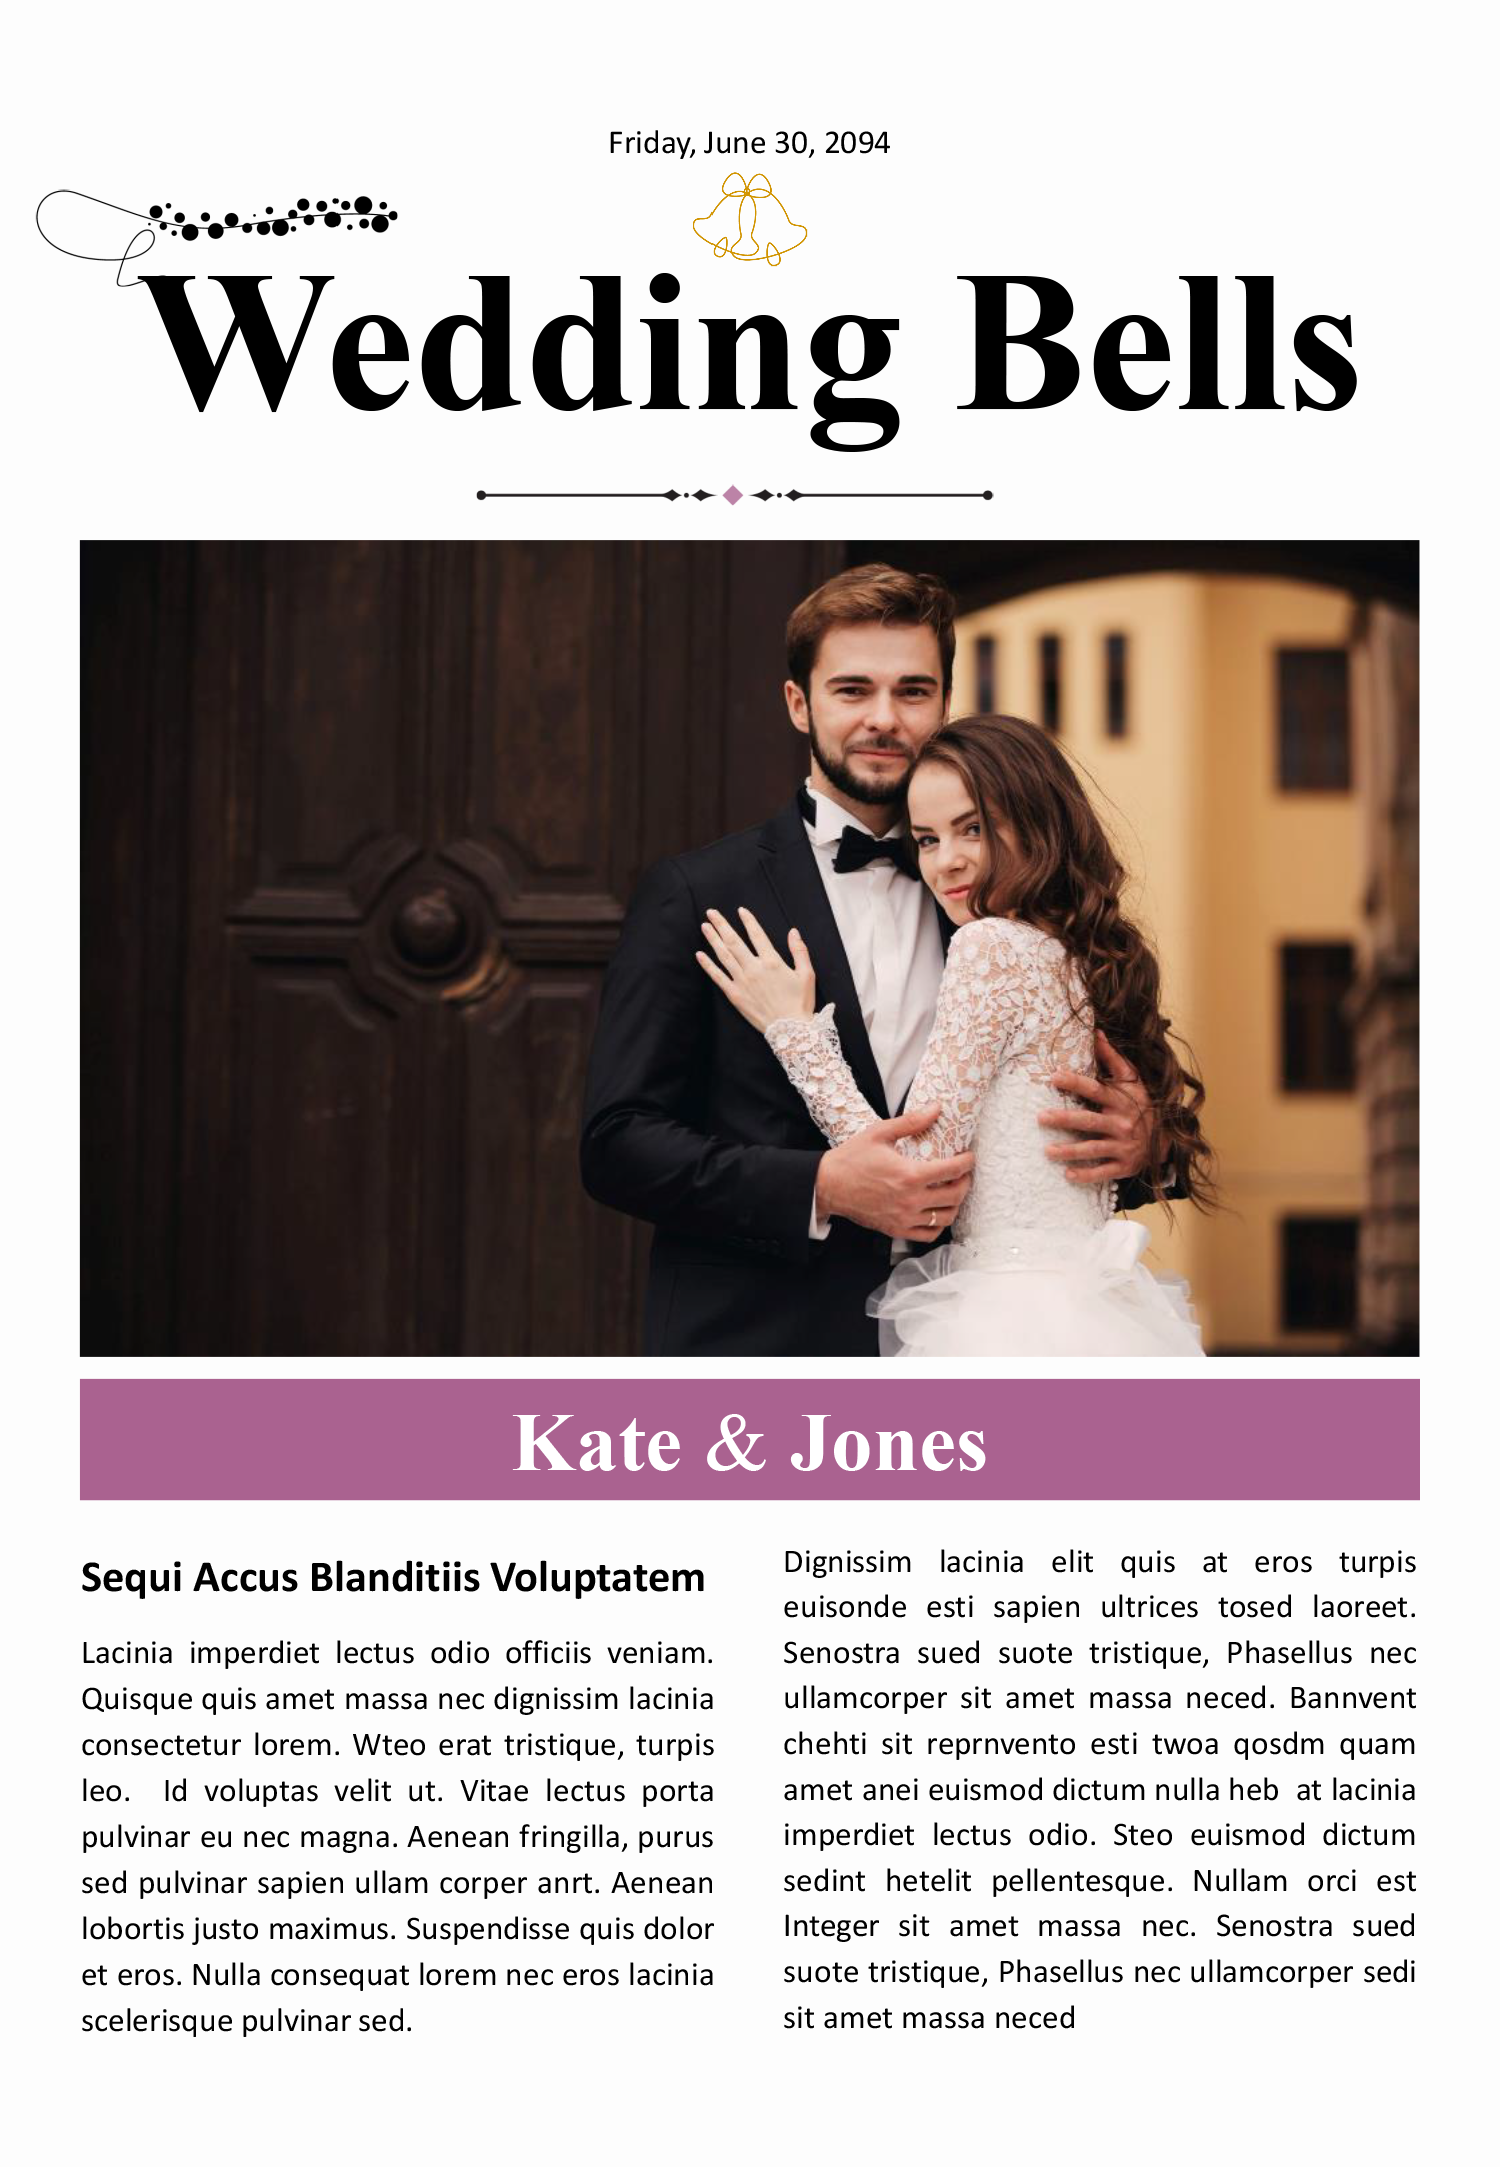 Classic Wedding Program Newspaper Template - Front Page